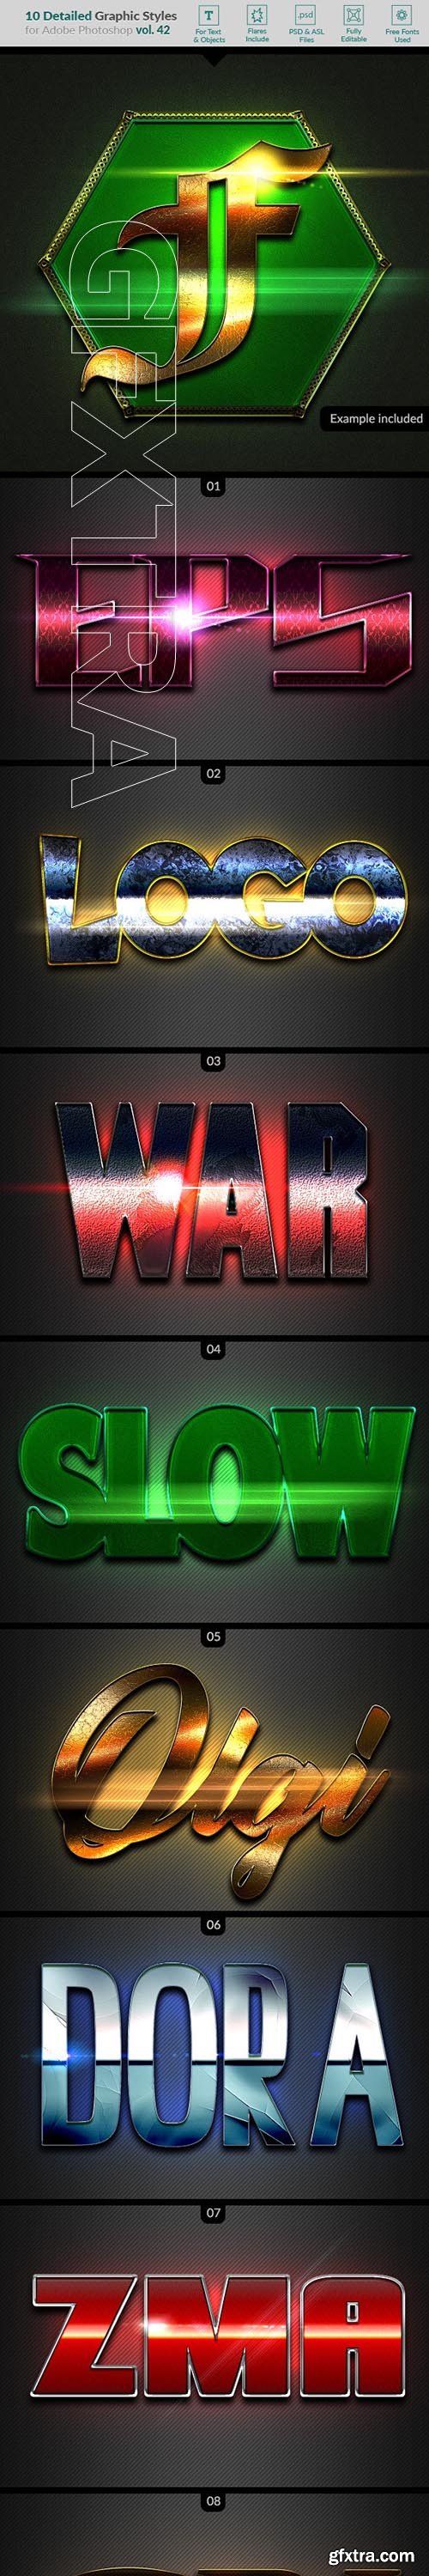 GraphicRiver - 10 Text Effects Vol. 42 23990797